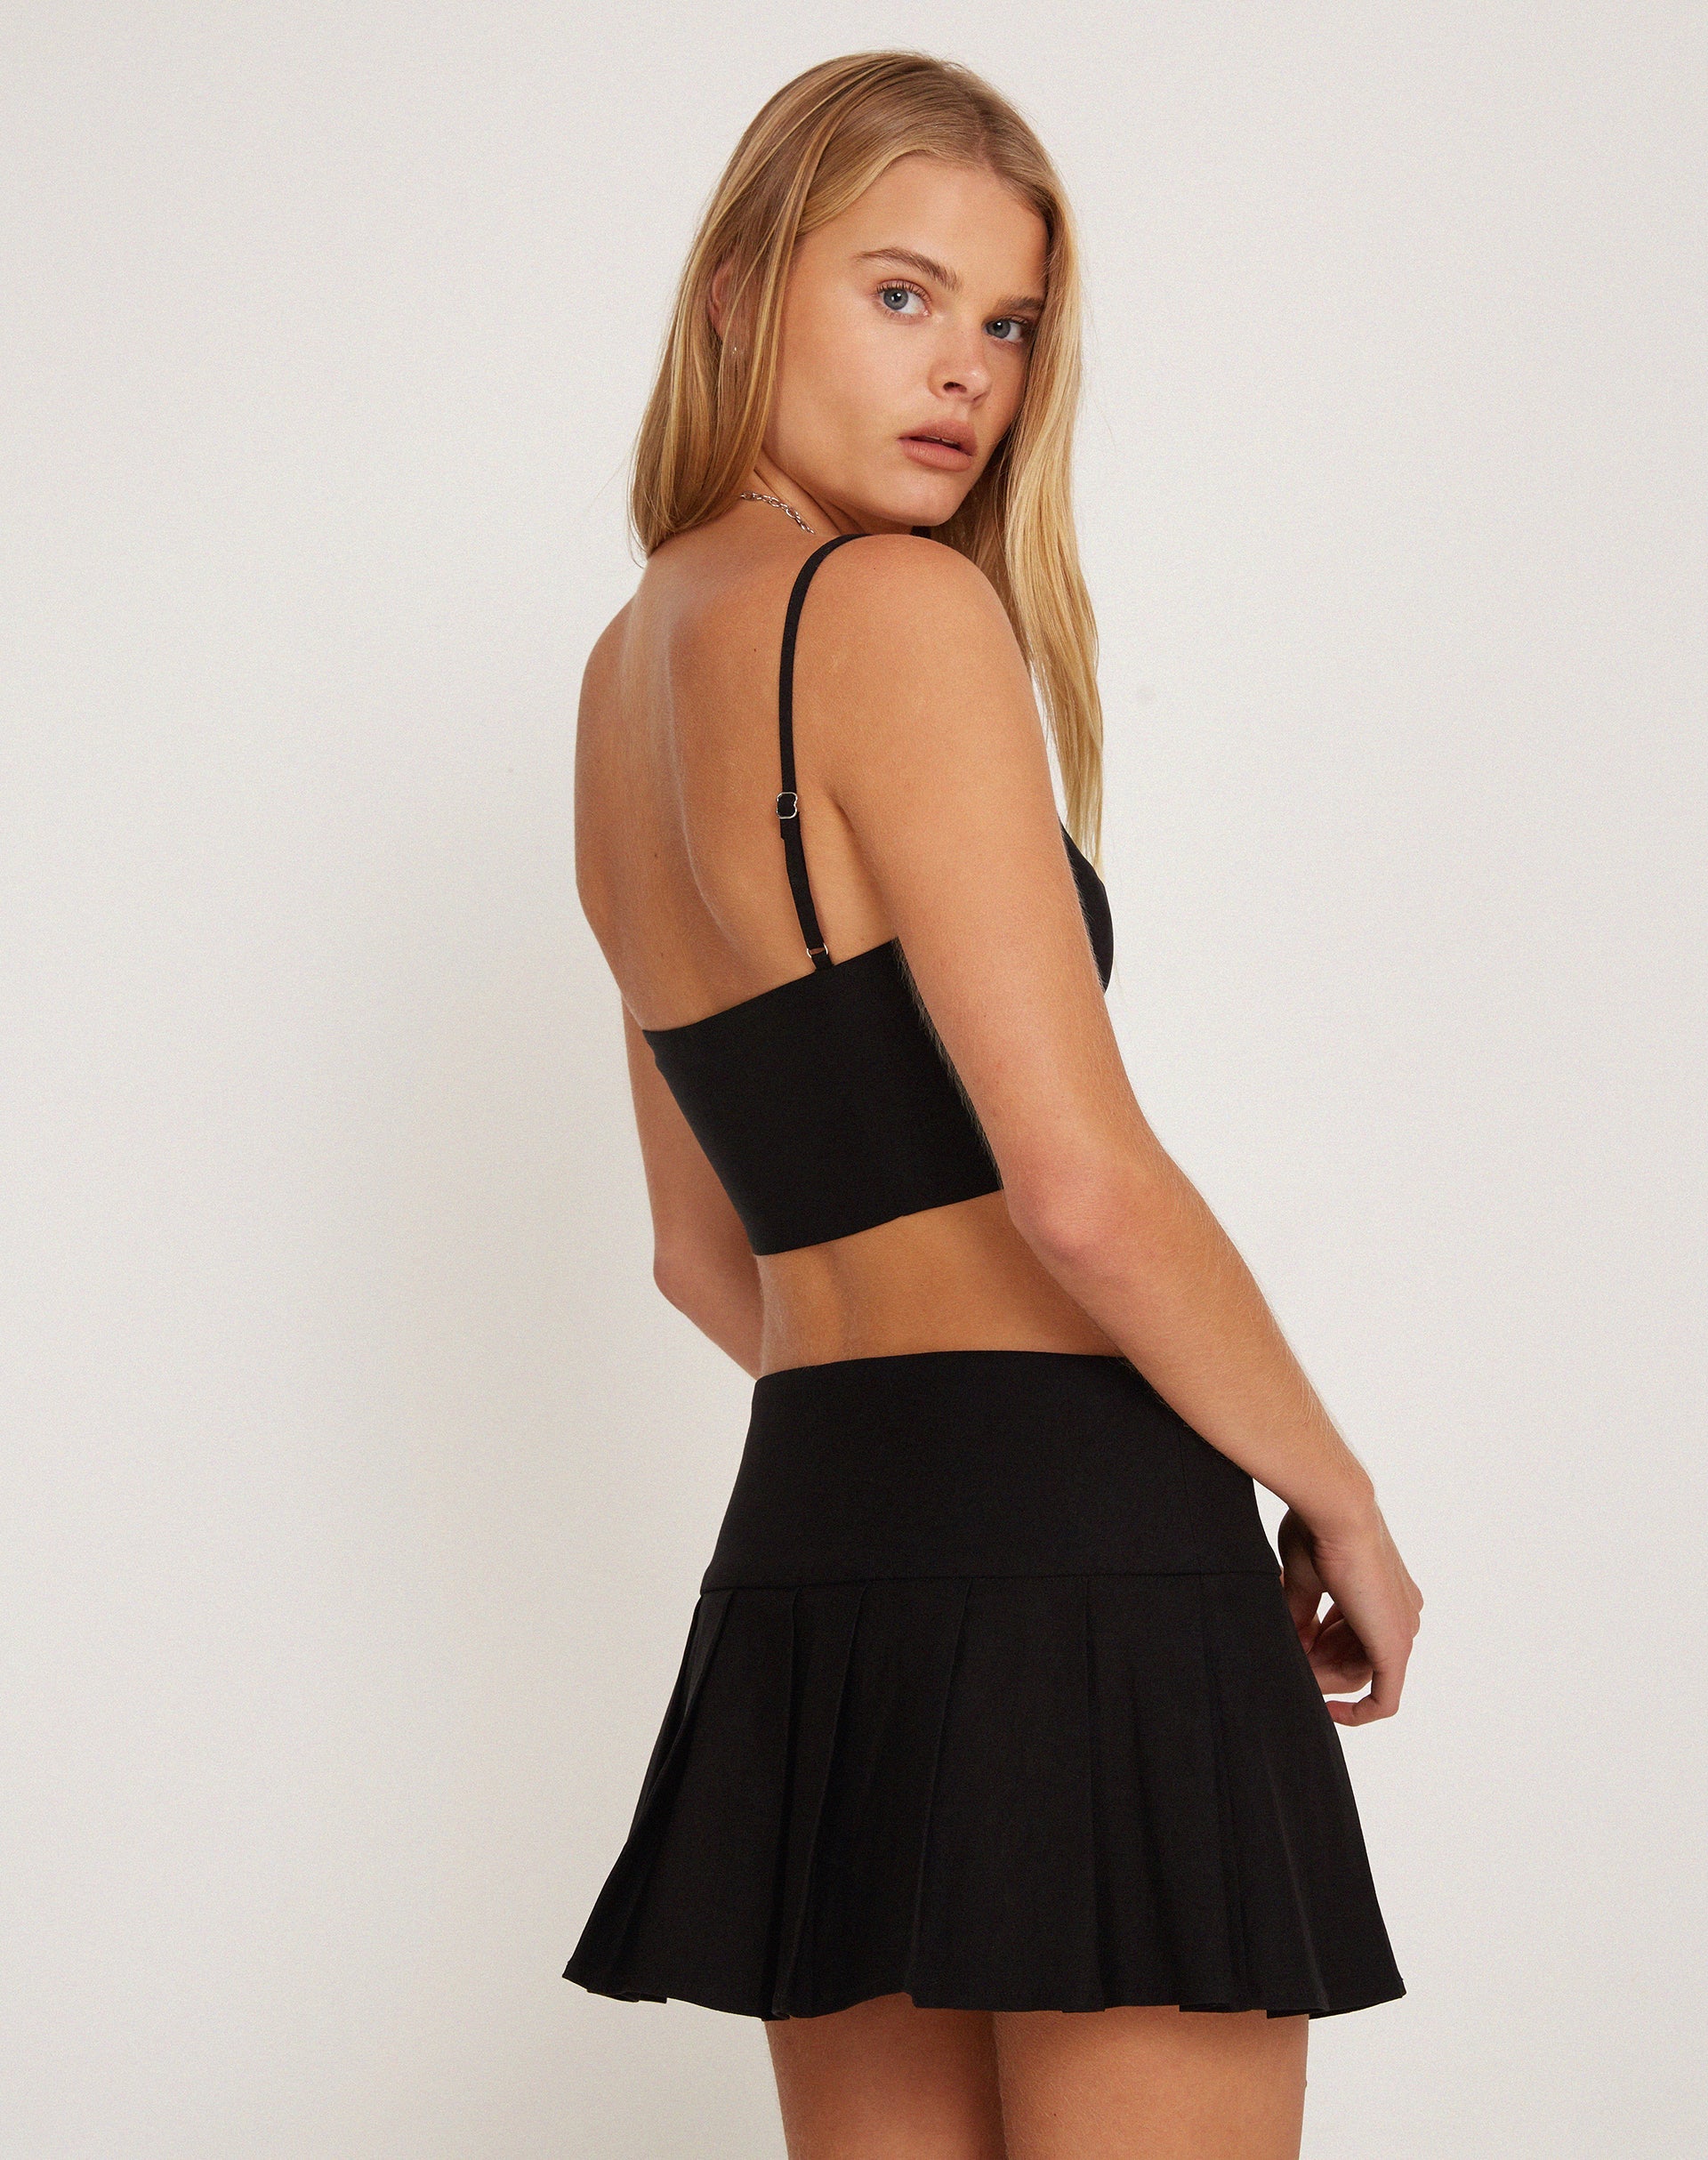 image of Rivas Crop Top in Tailoring Black with Pale Blue Trim